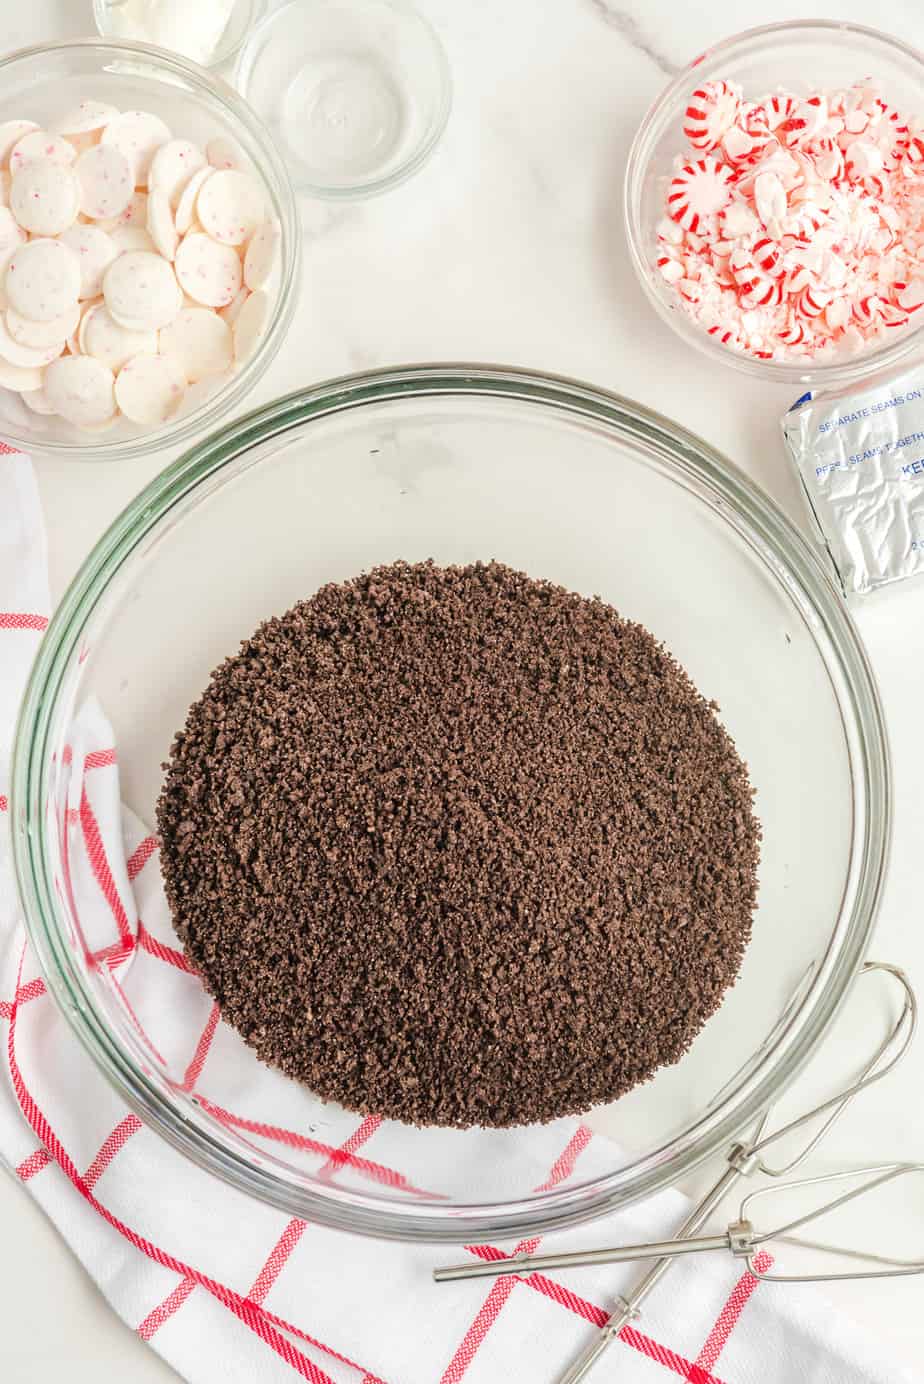 Chocolate cookie crumbs in a large bowl on a counter with peppermint extract, peppermints, and white chocolate peppermint wafers in bowls nearby.